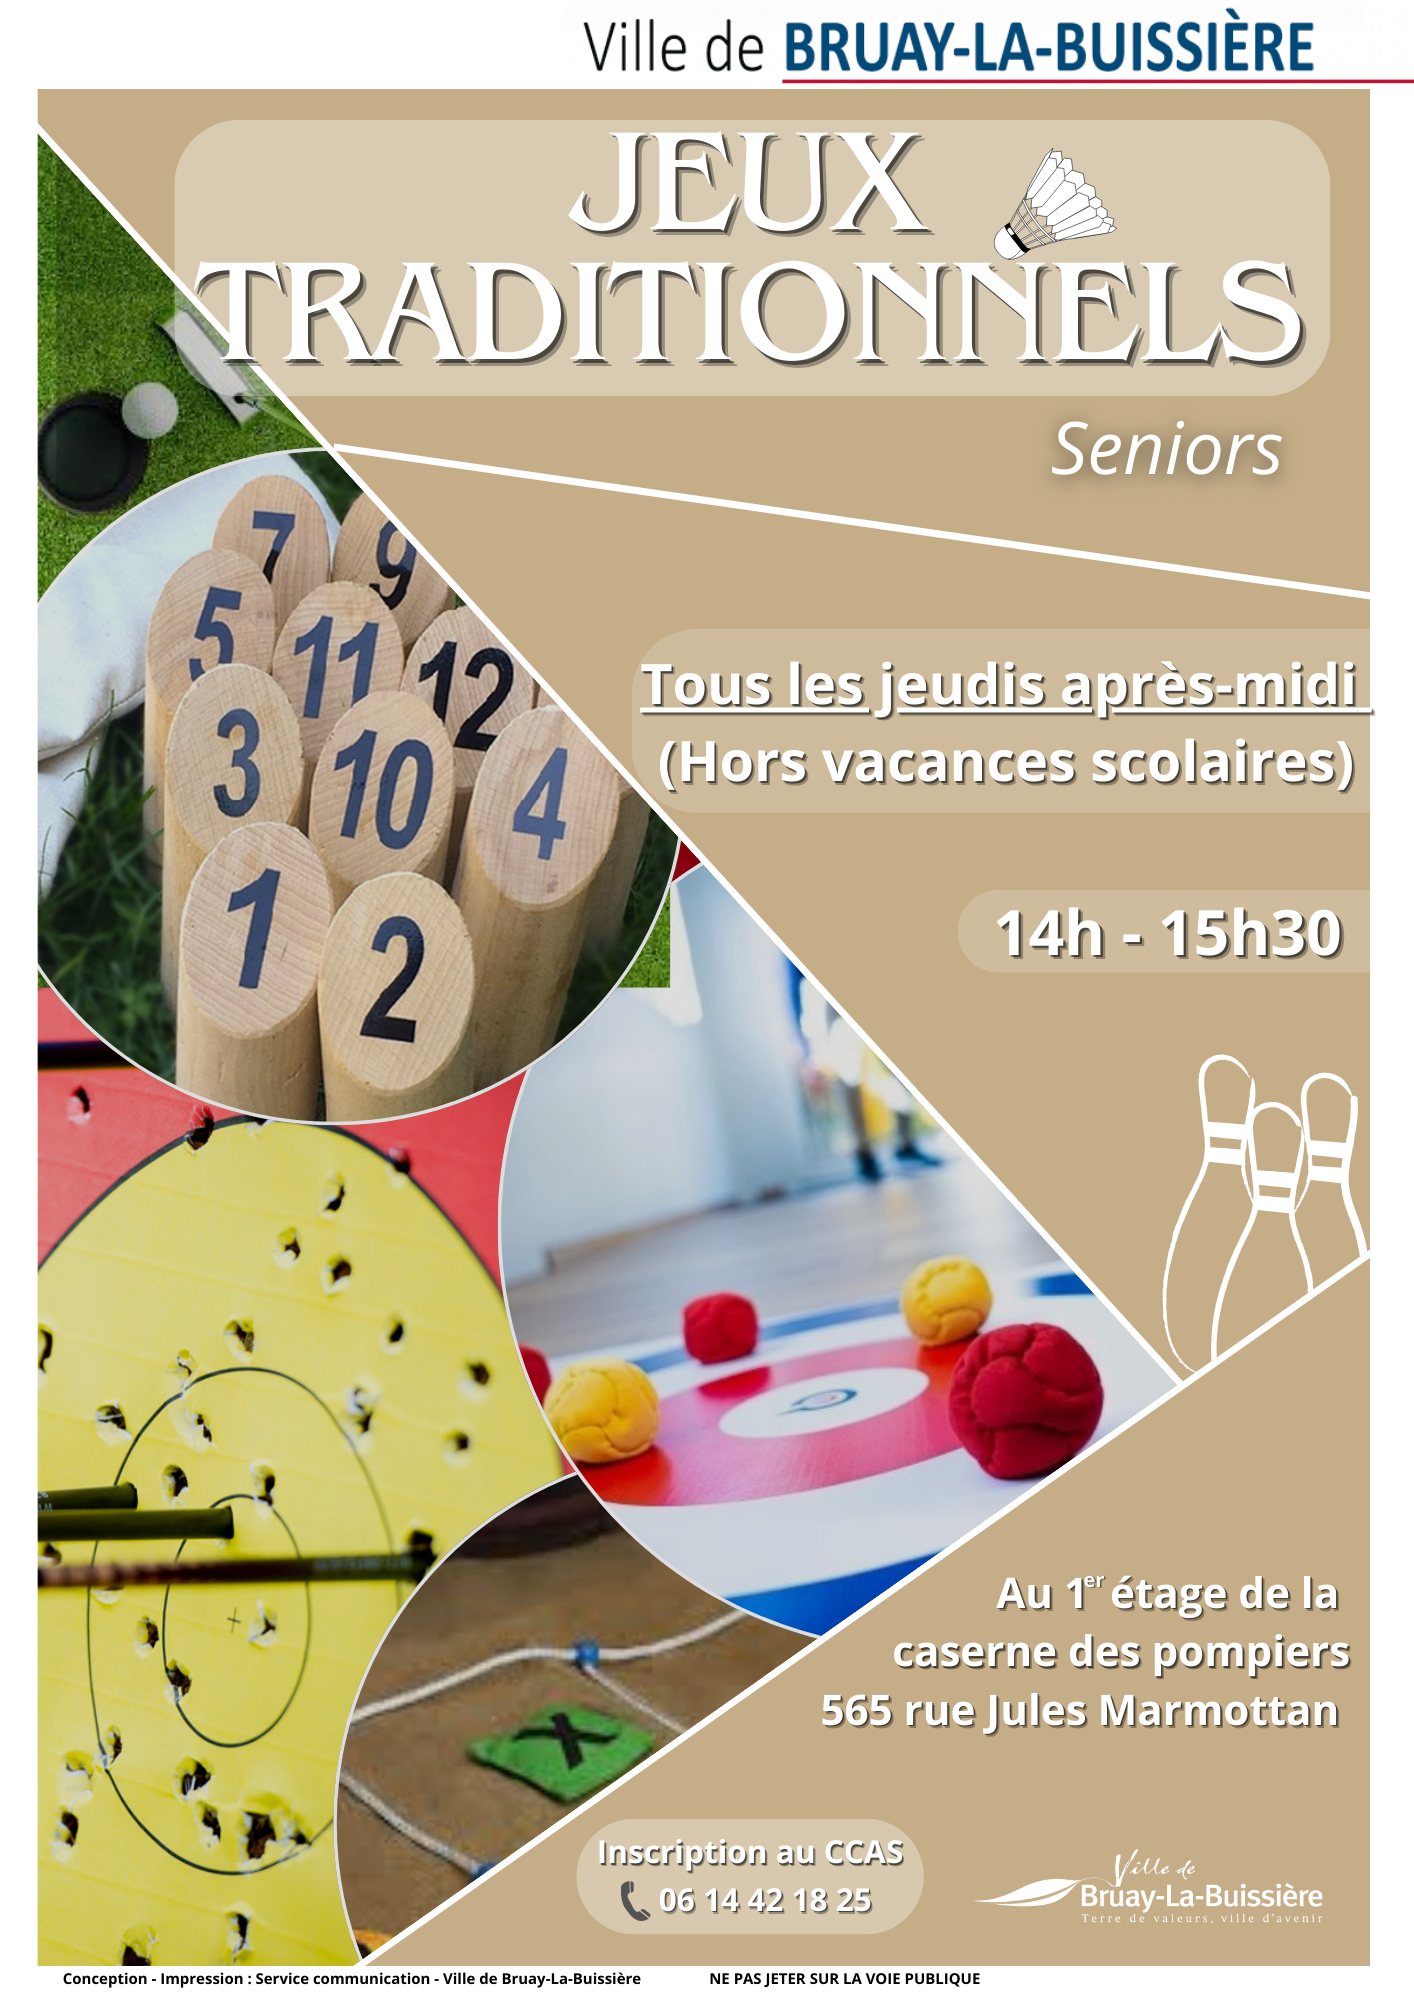 Sports anciens traditionnels